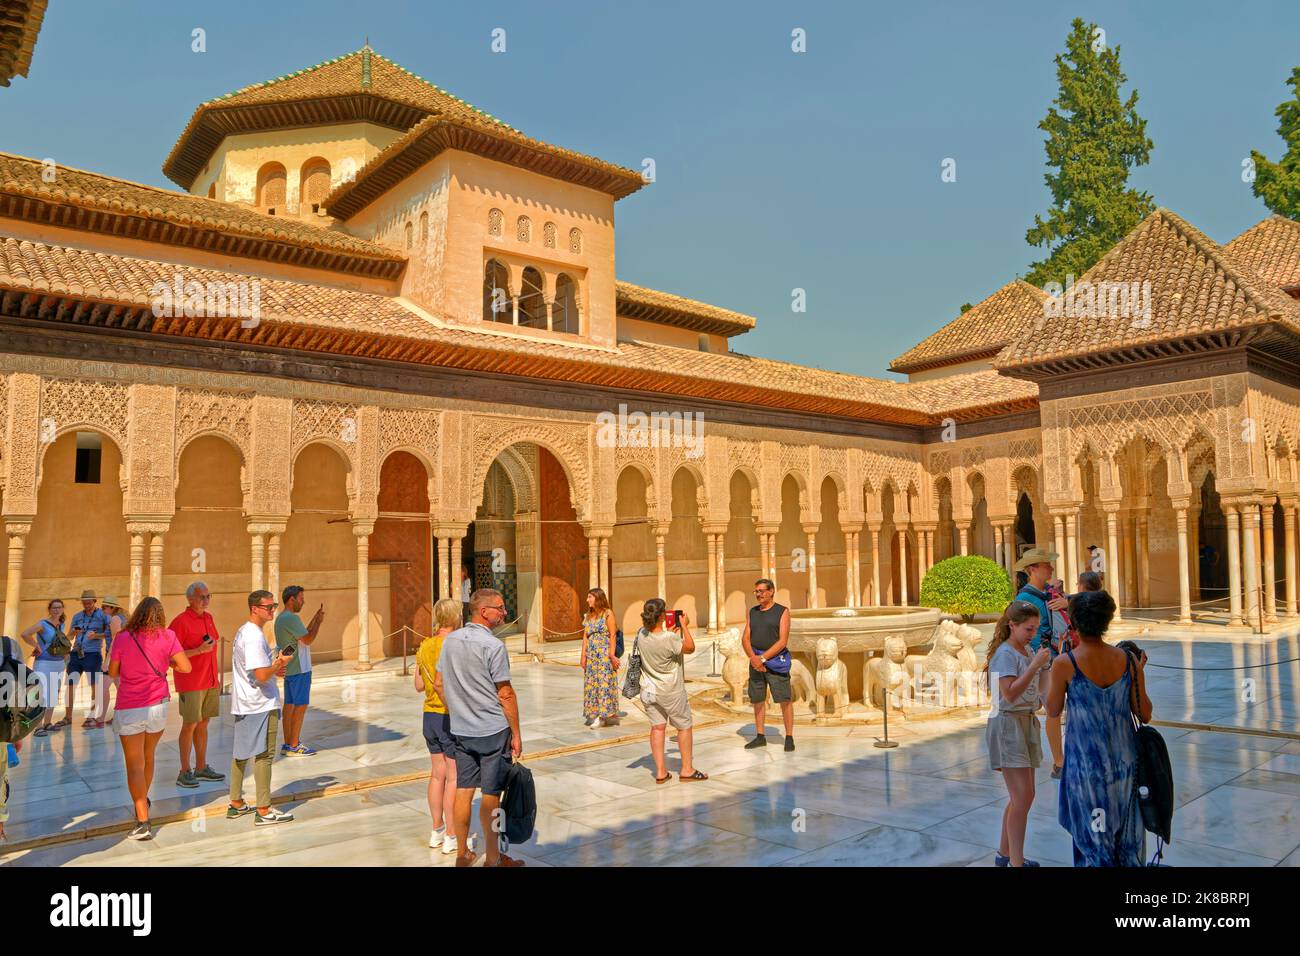 The Palace of the Lions, one of the 3 main Palaces of the Alhambra Palace complex in Granada, Andalusia, Spain. Stock Photo